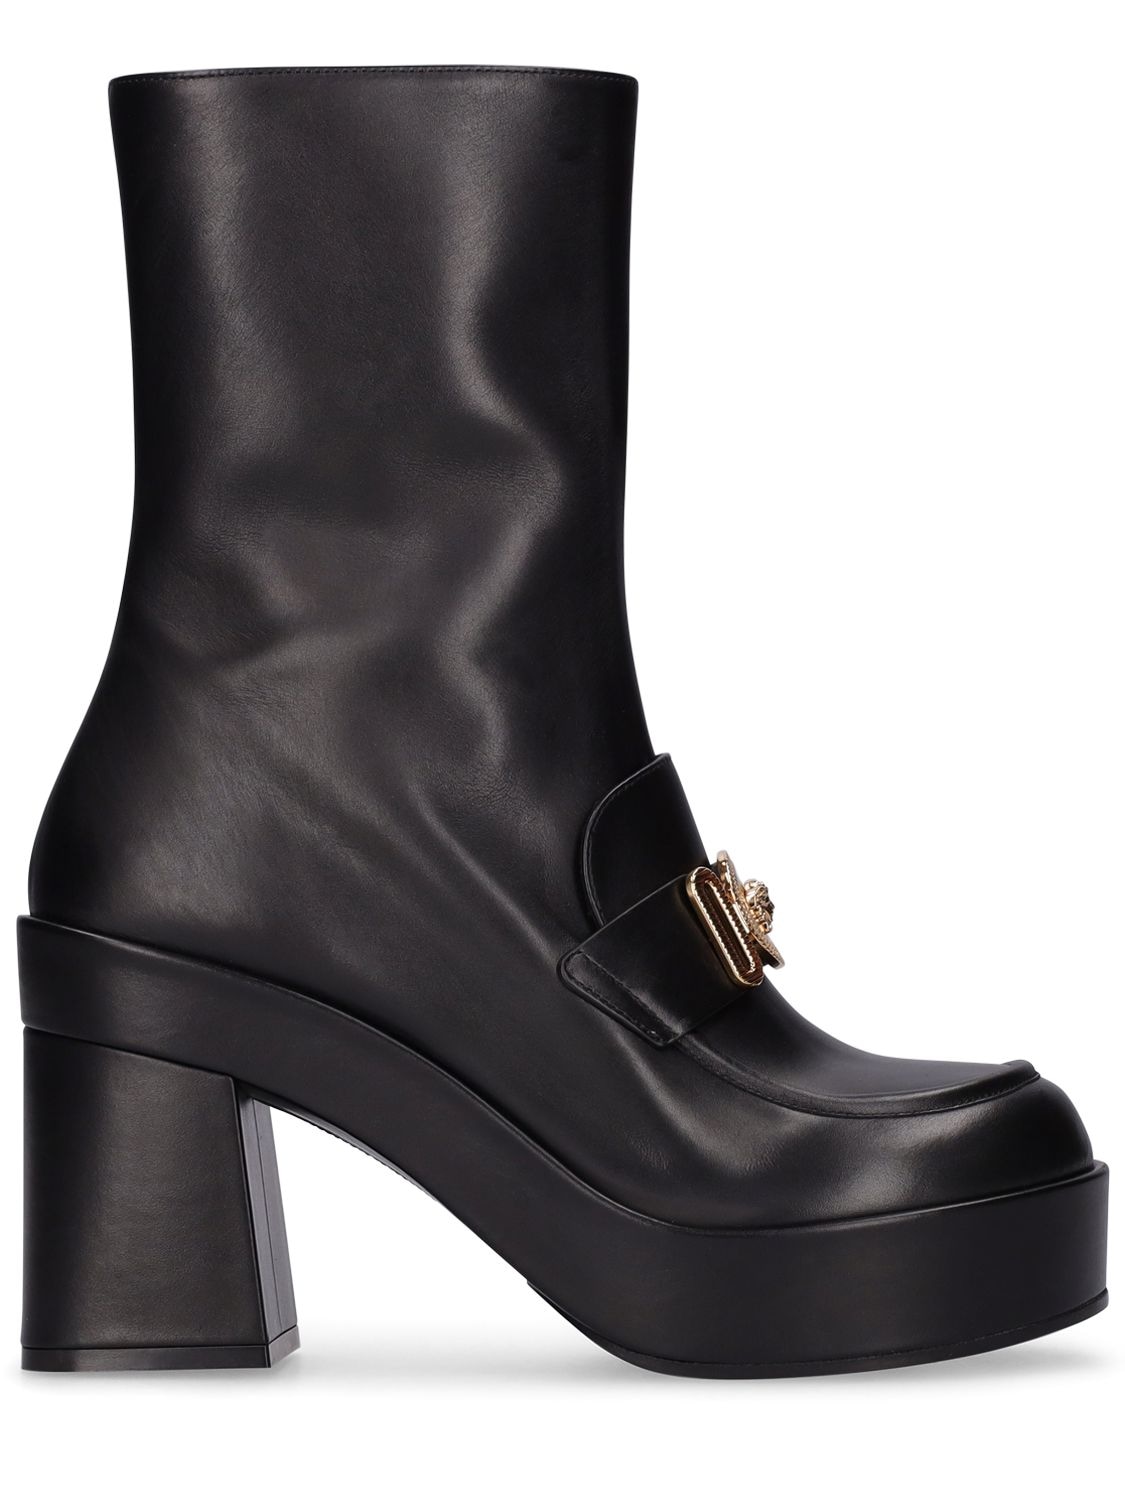 VERSACE 100mm Leather Ankle Boots